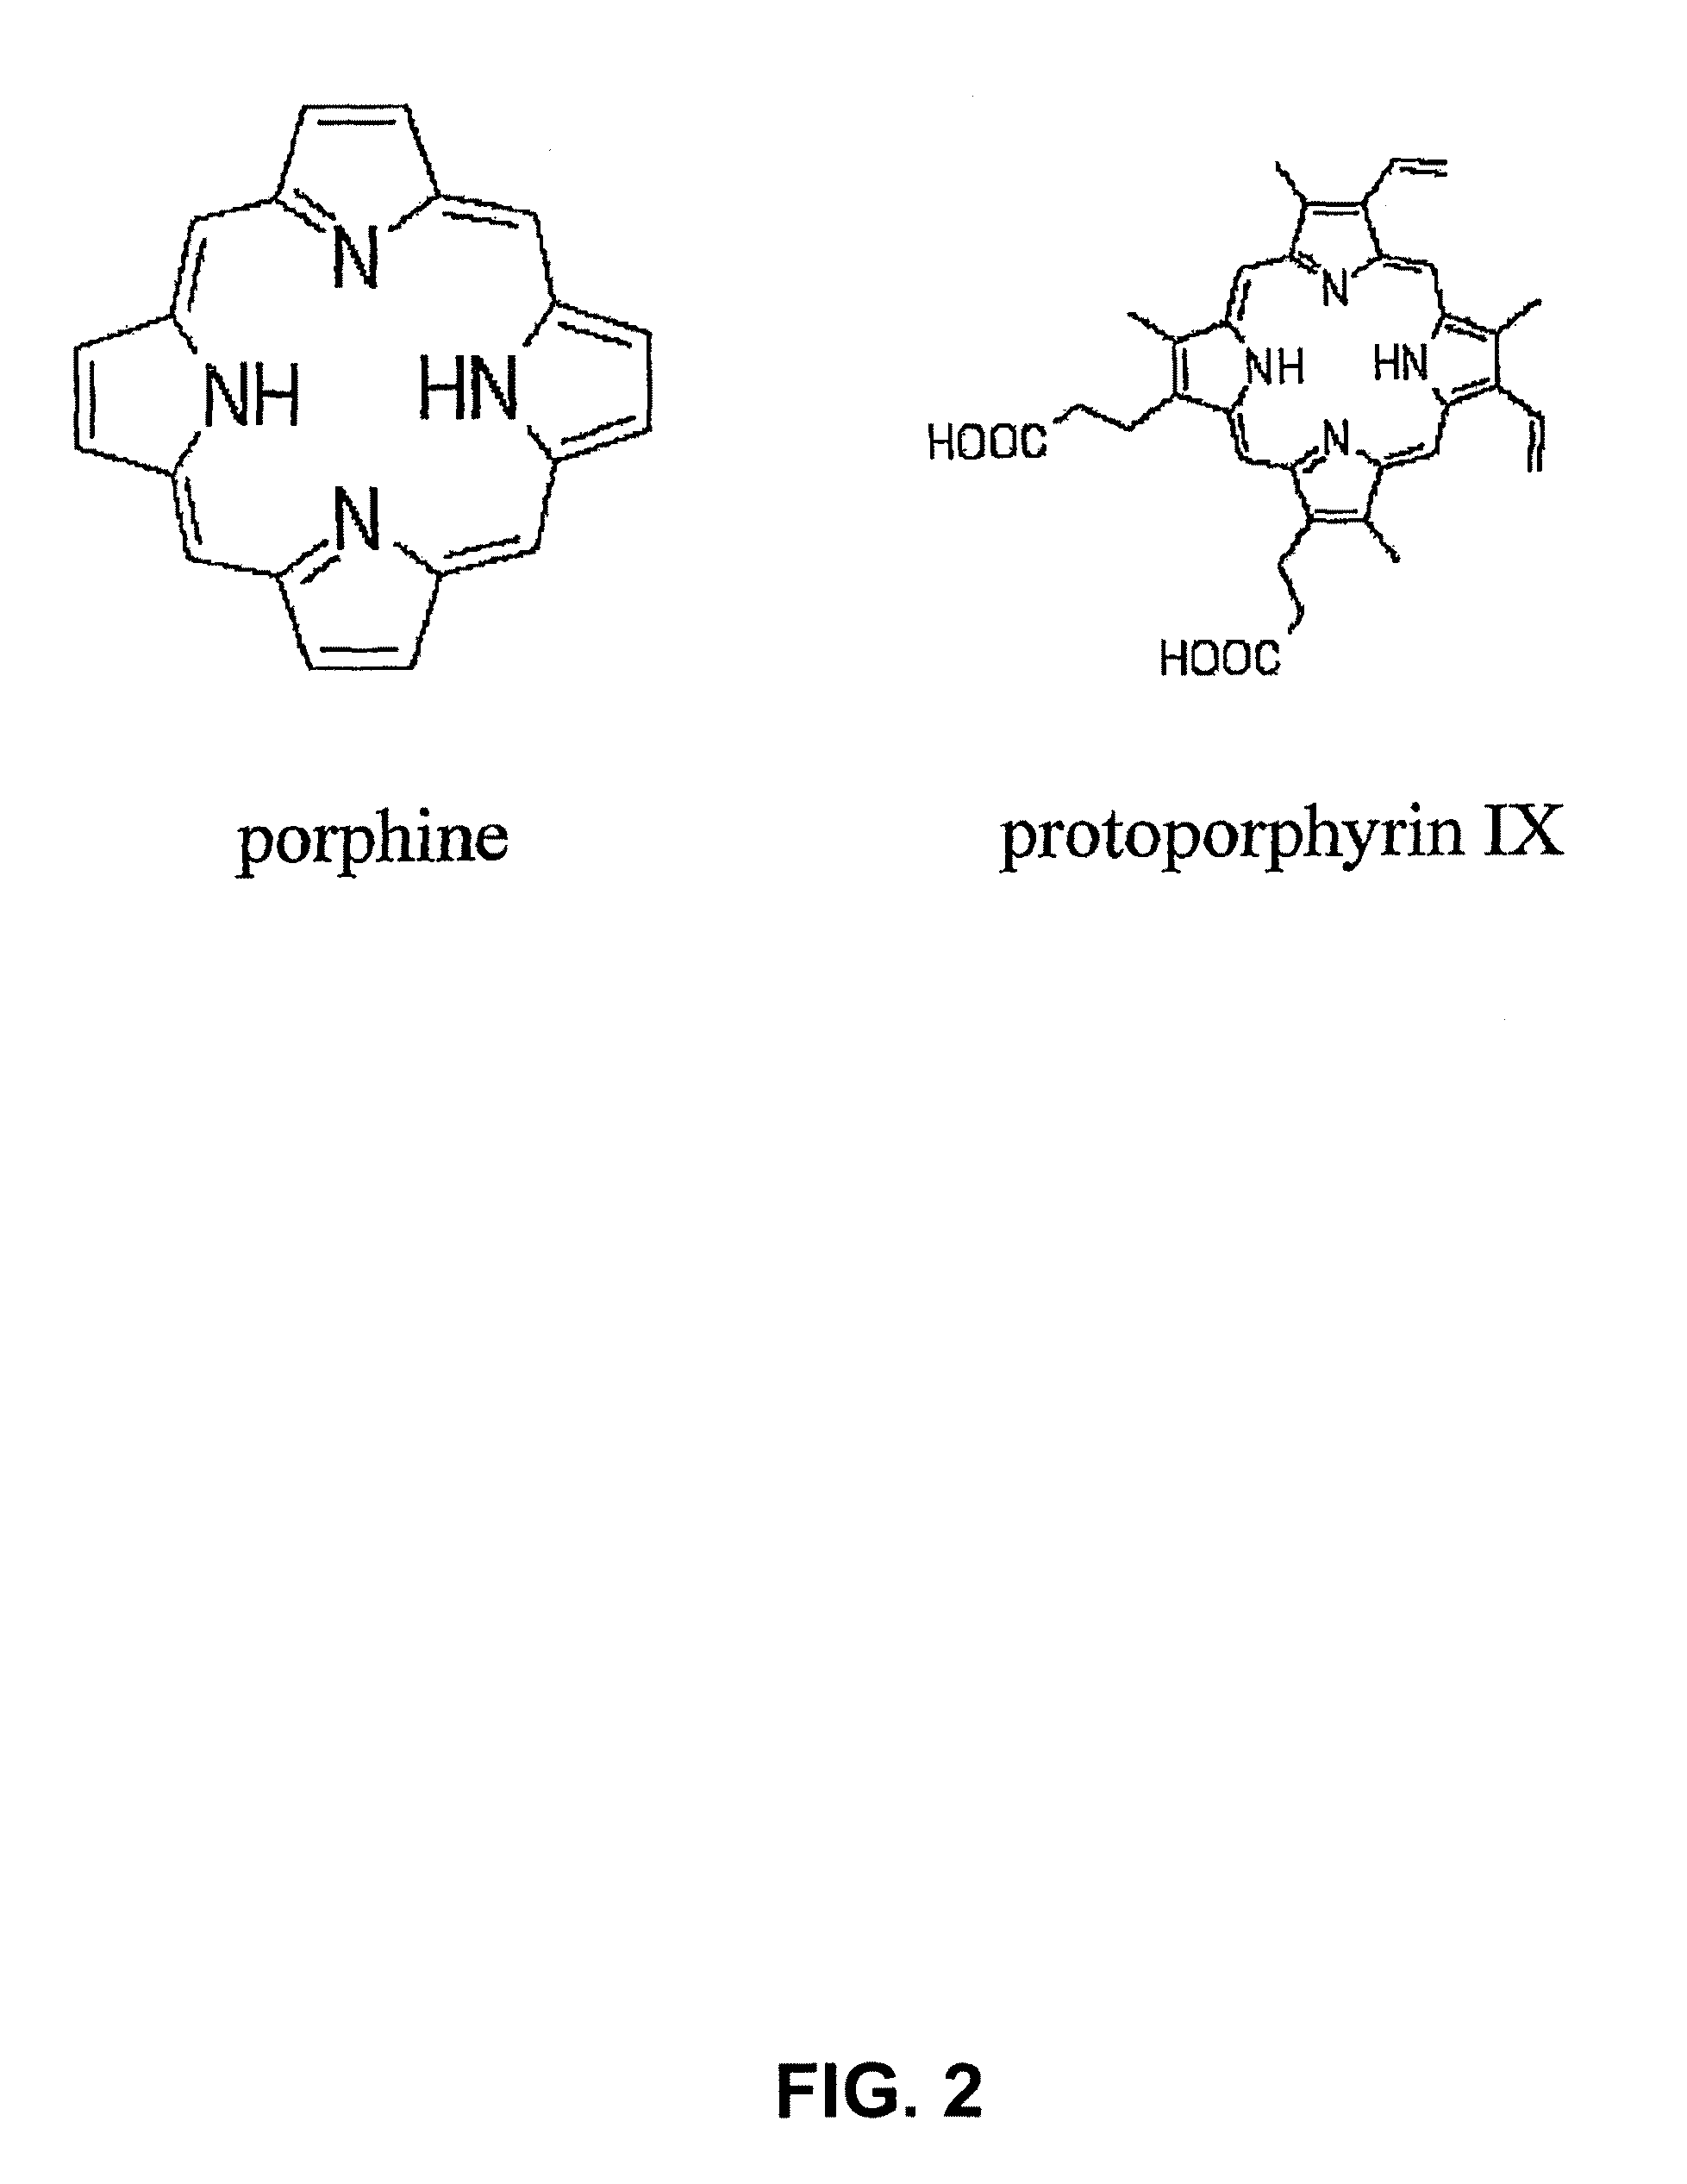 Methods for determining oxygen concentration with protoporphyrin IX